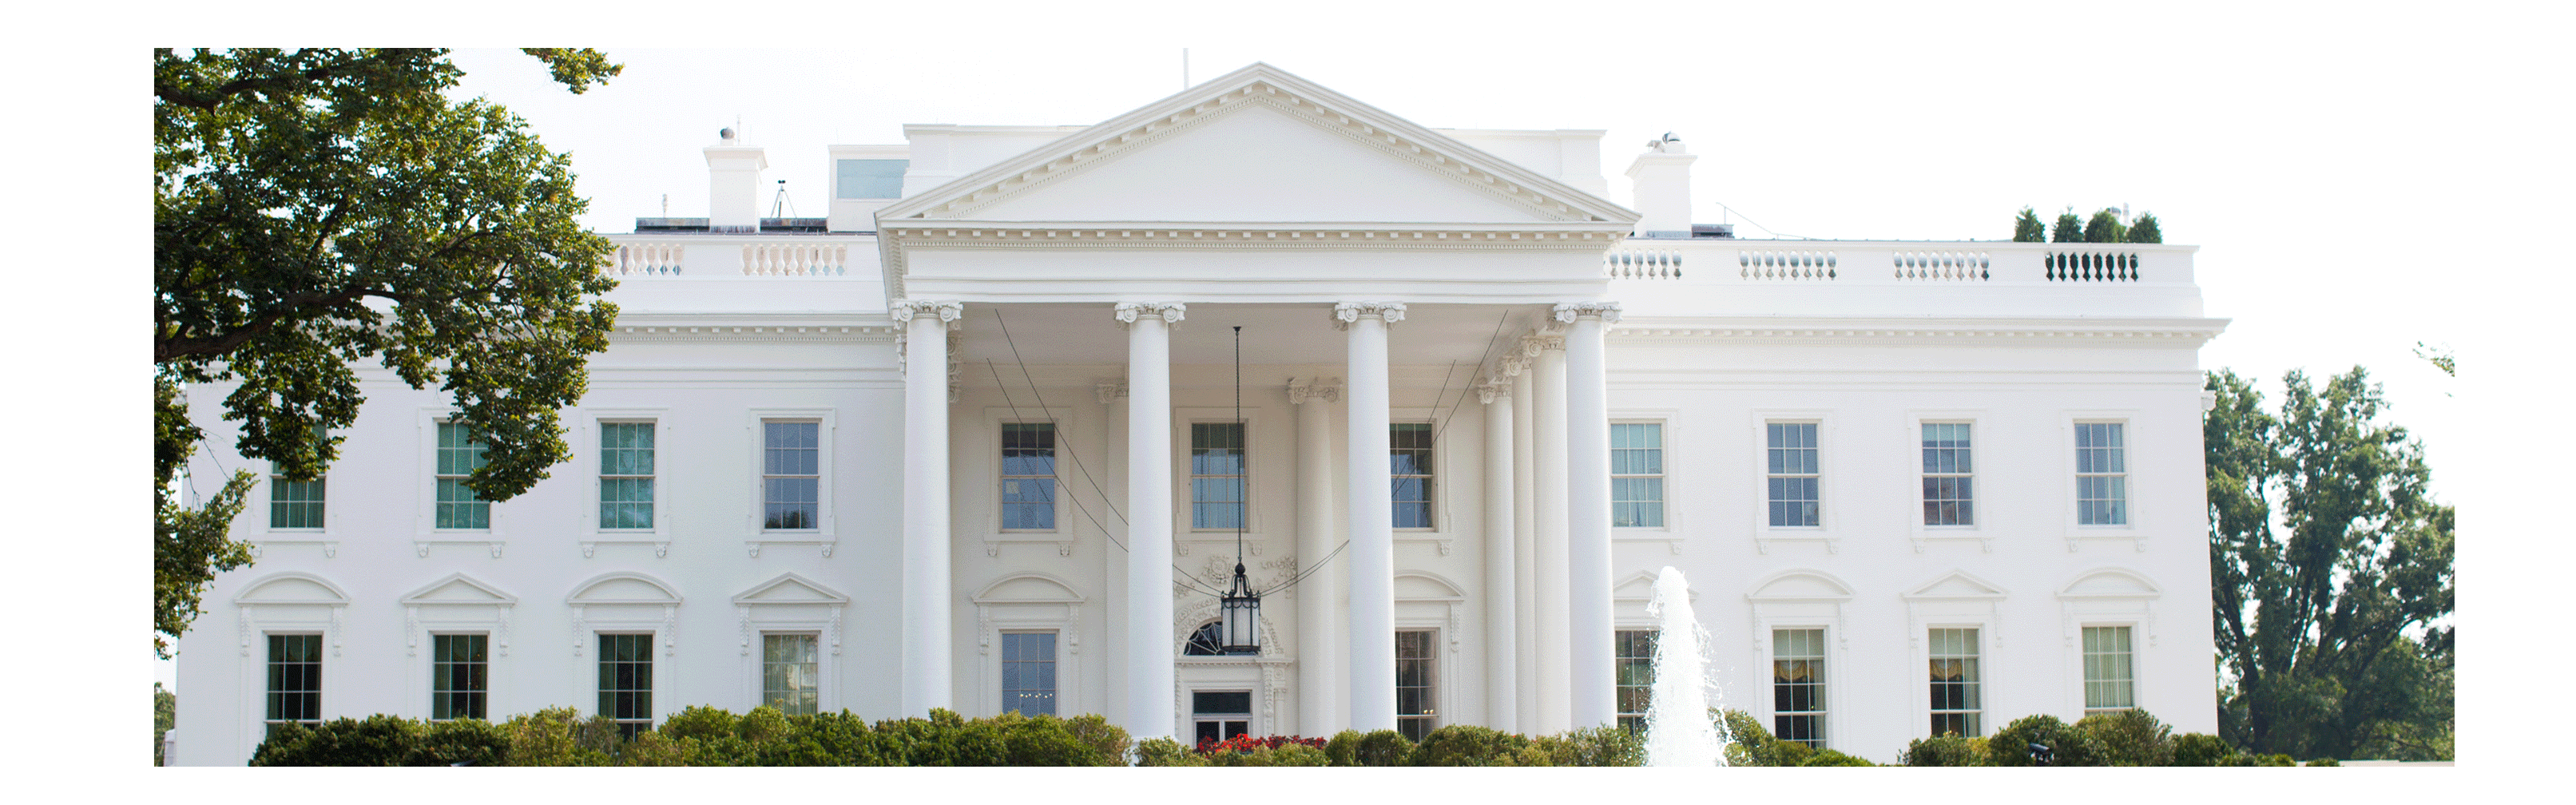 White House PNG Image in High Definition